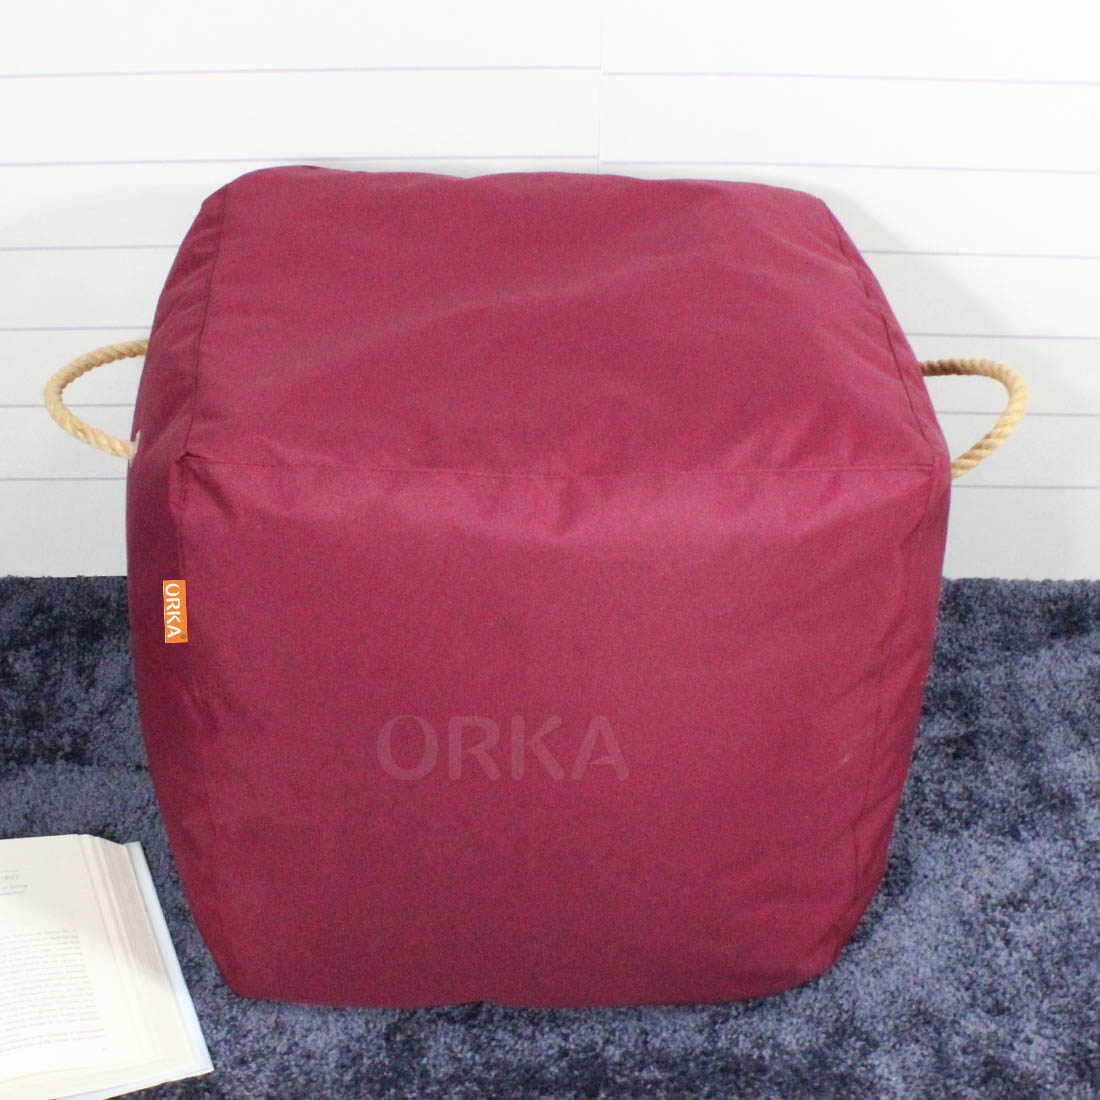 ORKA Denier Fabric 18 X 18 Inch Premium Pouf With Beans - Pink  